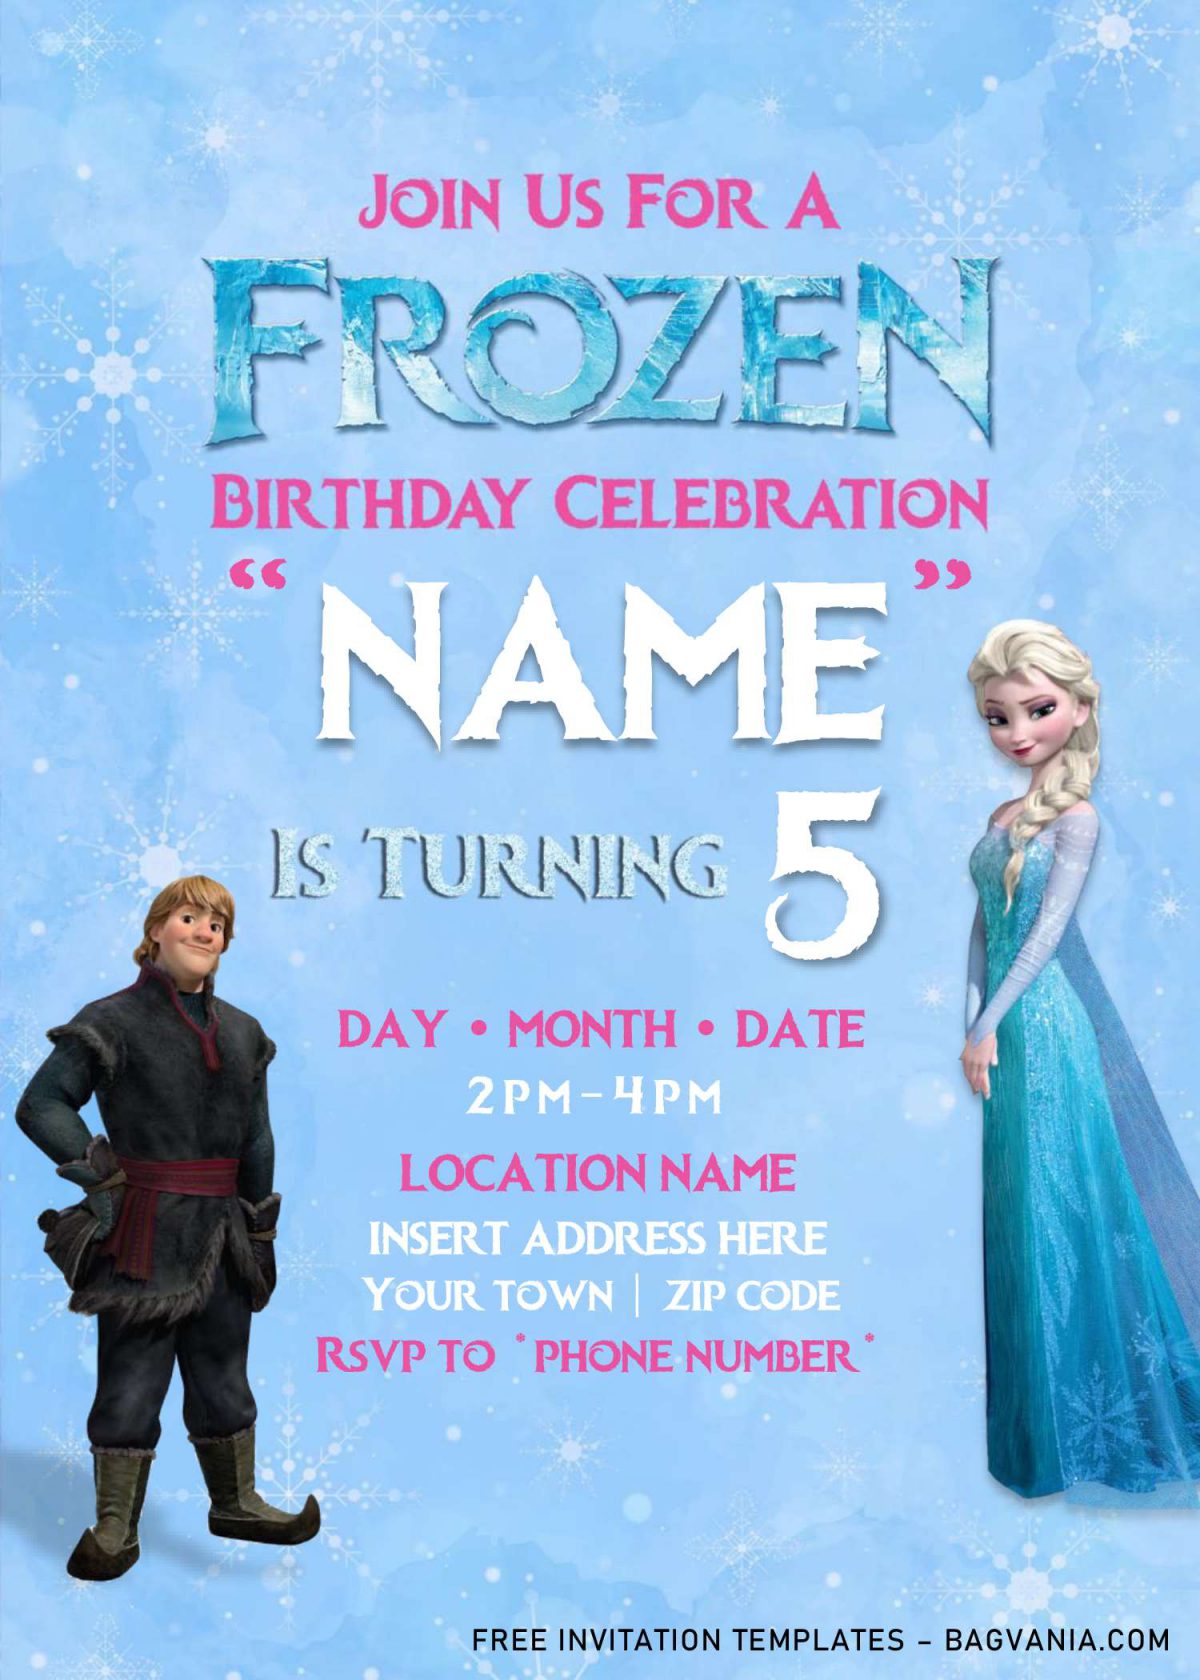 Free Frozen Birthday Invitation Templates For Word and has Kristoff and blue background